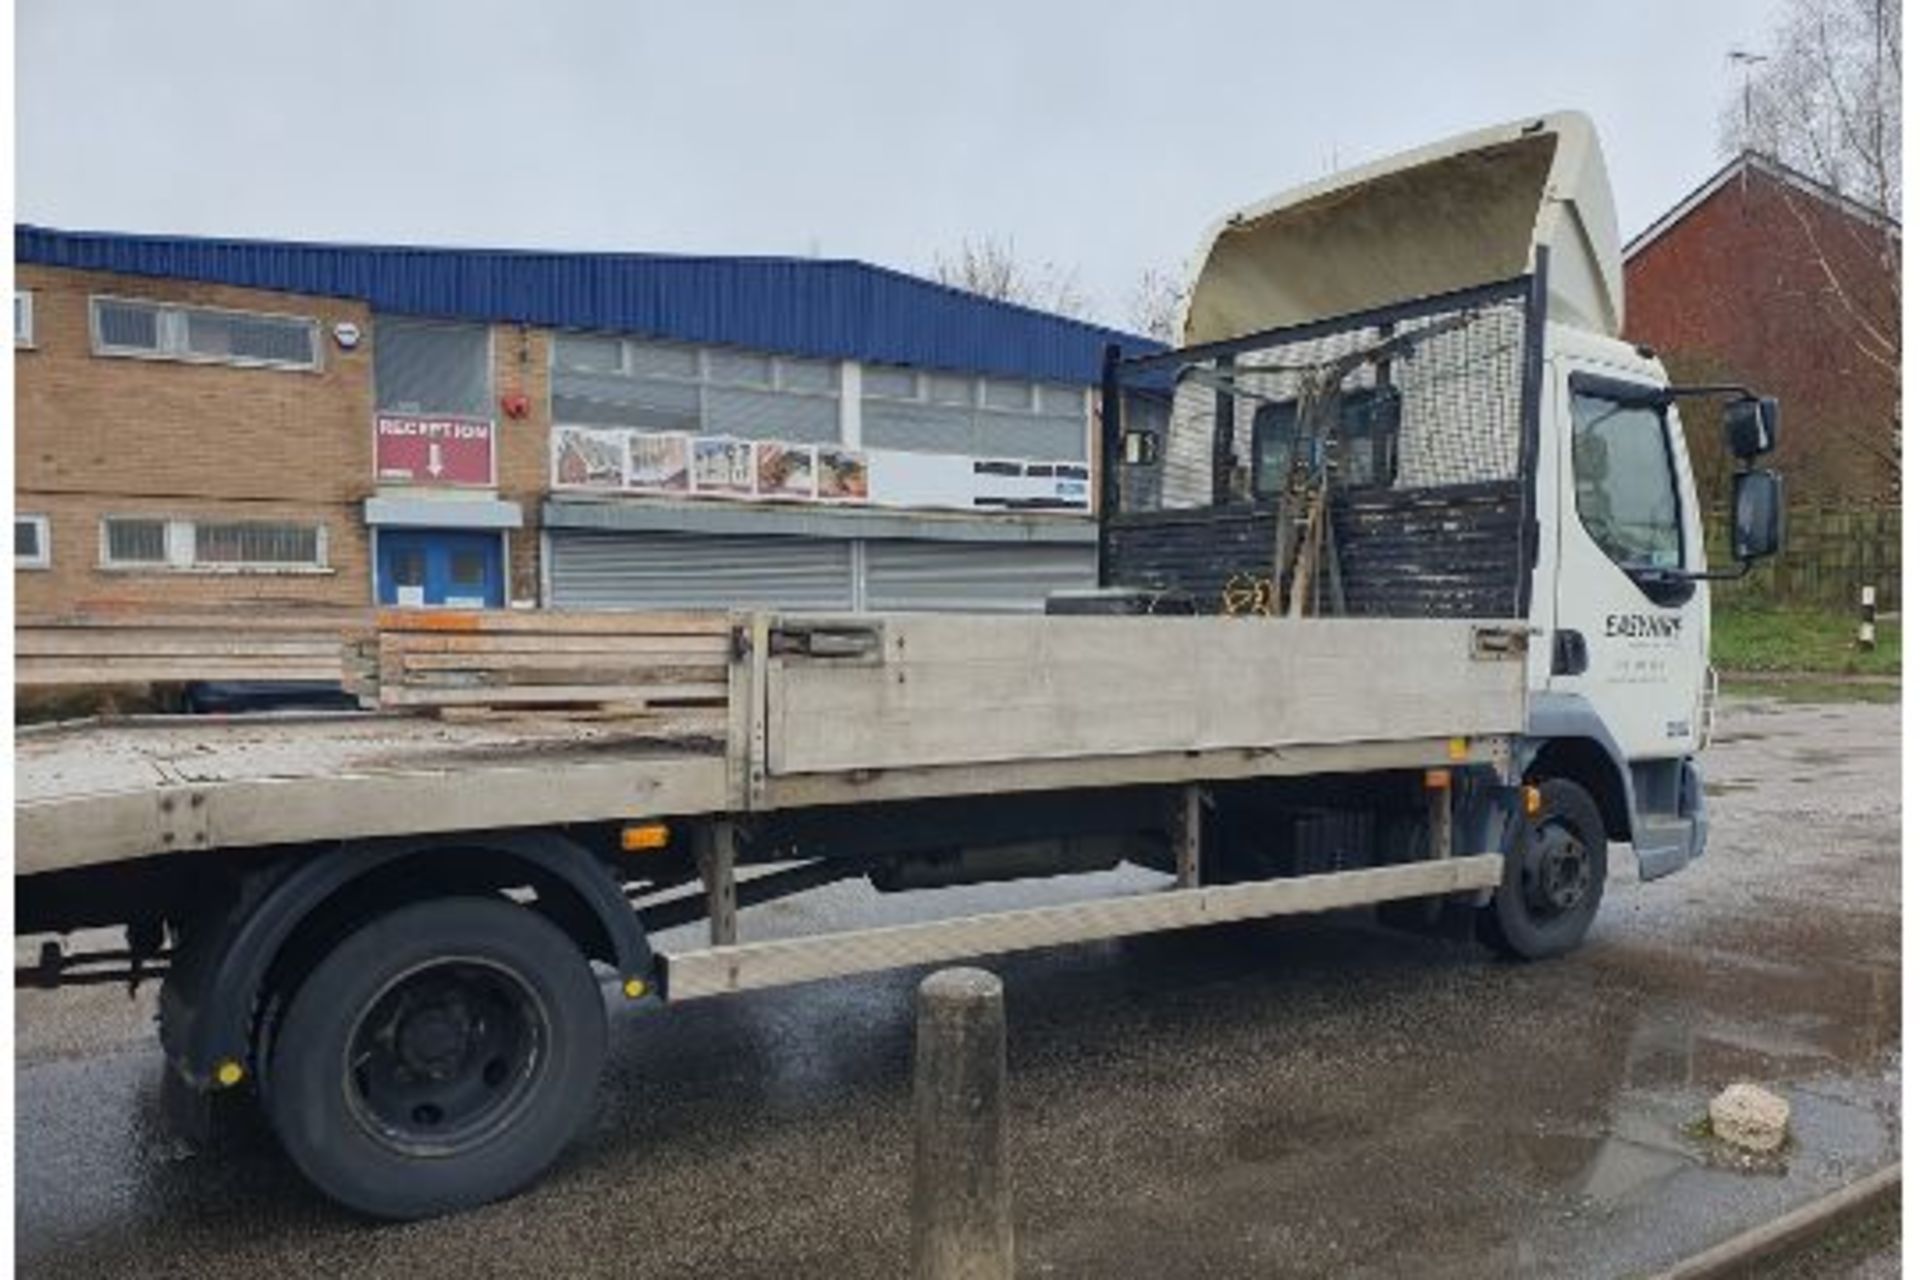 DAF LF 45.160 Flatbed Lorry w/ Loading Ramp & Electric Winch | DIG 4987 | 494,328km | *Non Runner* - Image 11 of 22